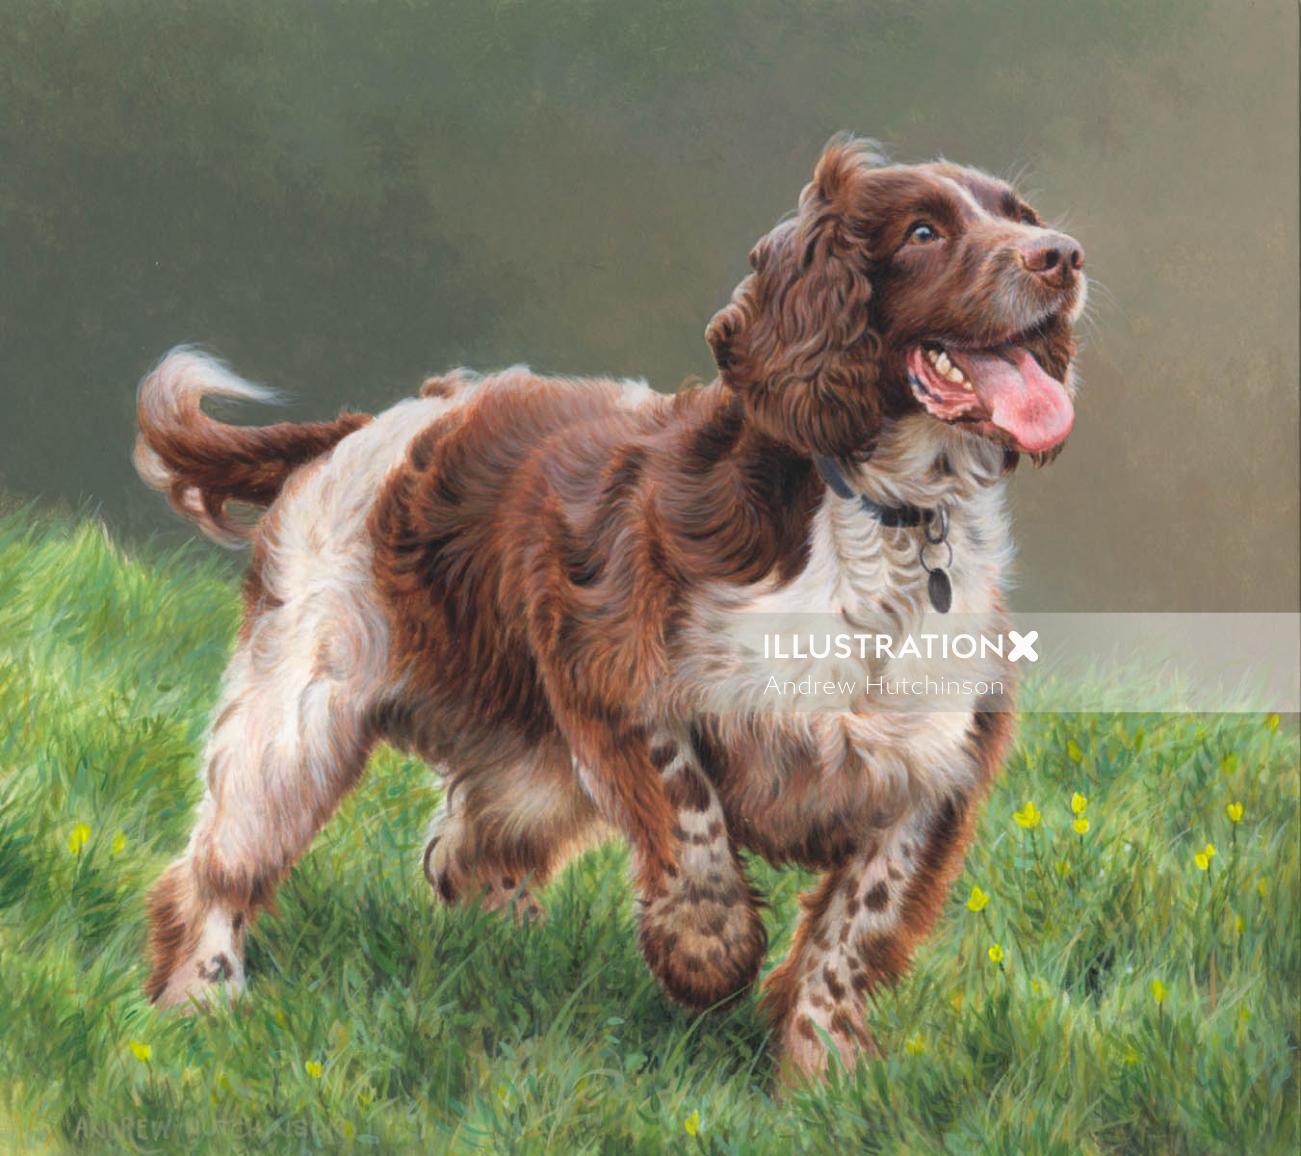 Springer spaniel Illustration, Dogs and Animals Images © Andrew Hutchinson